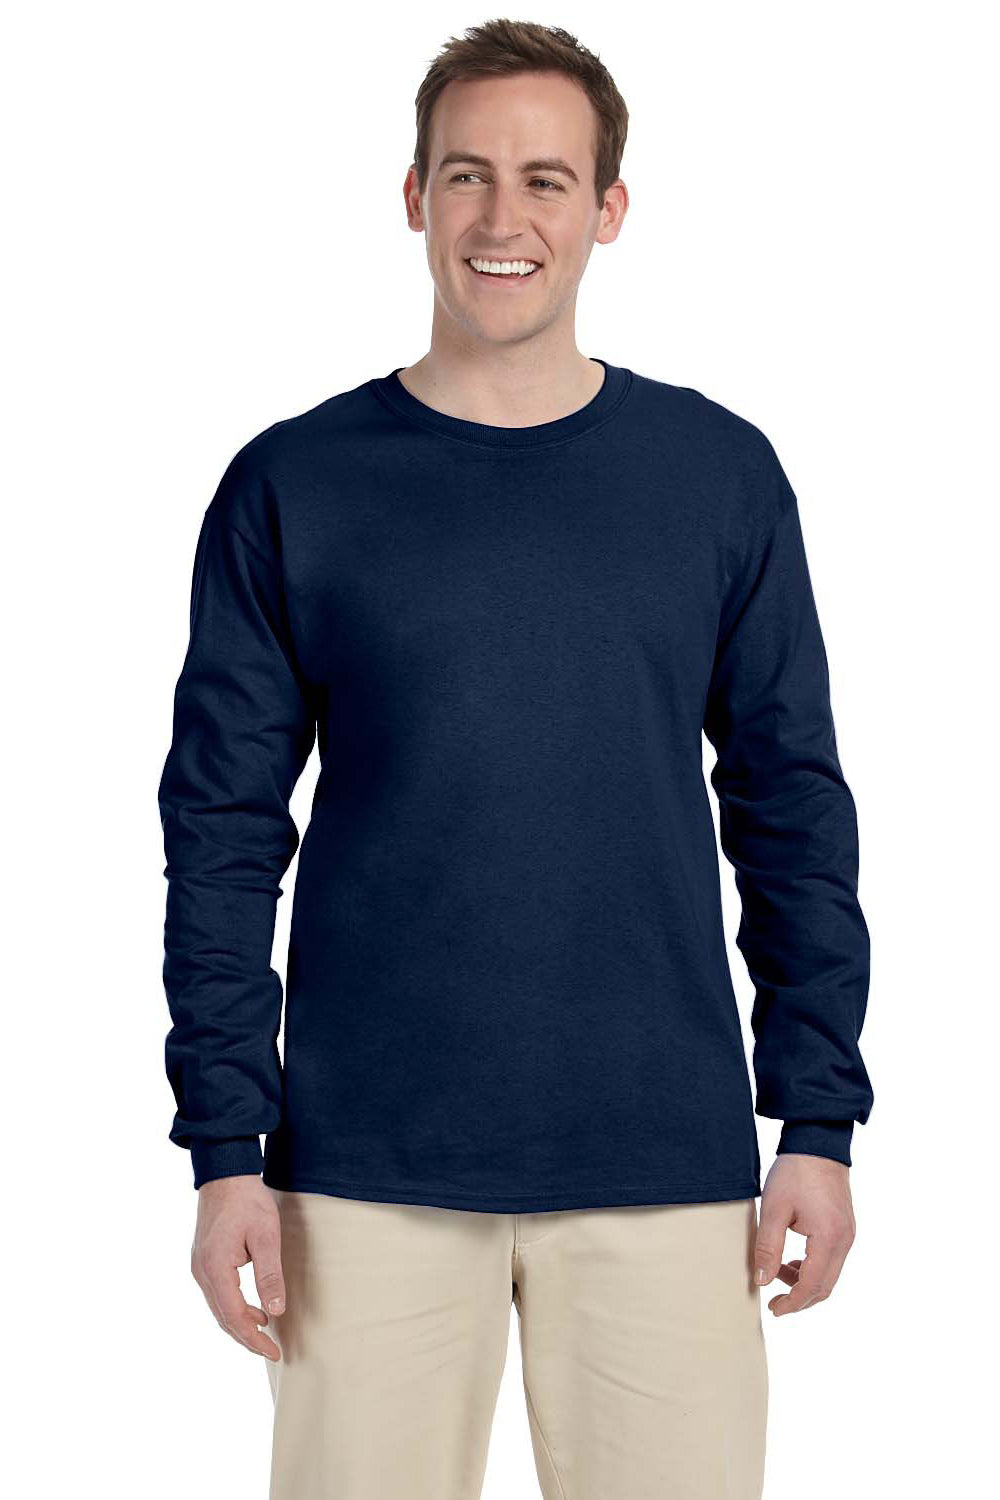 Fruit Of The Loom 4930 Mens HD Jersey Long Sleeve Crewneck T-Shirt Navy Blue Front